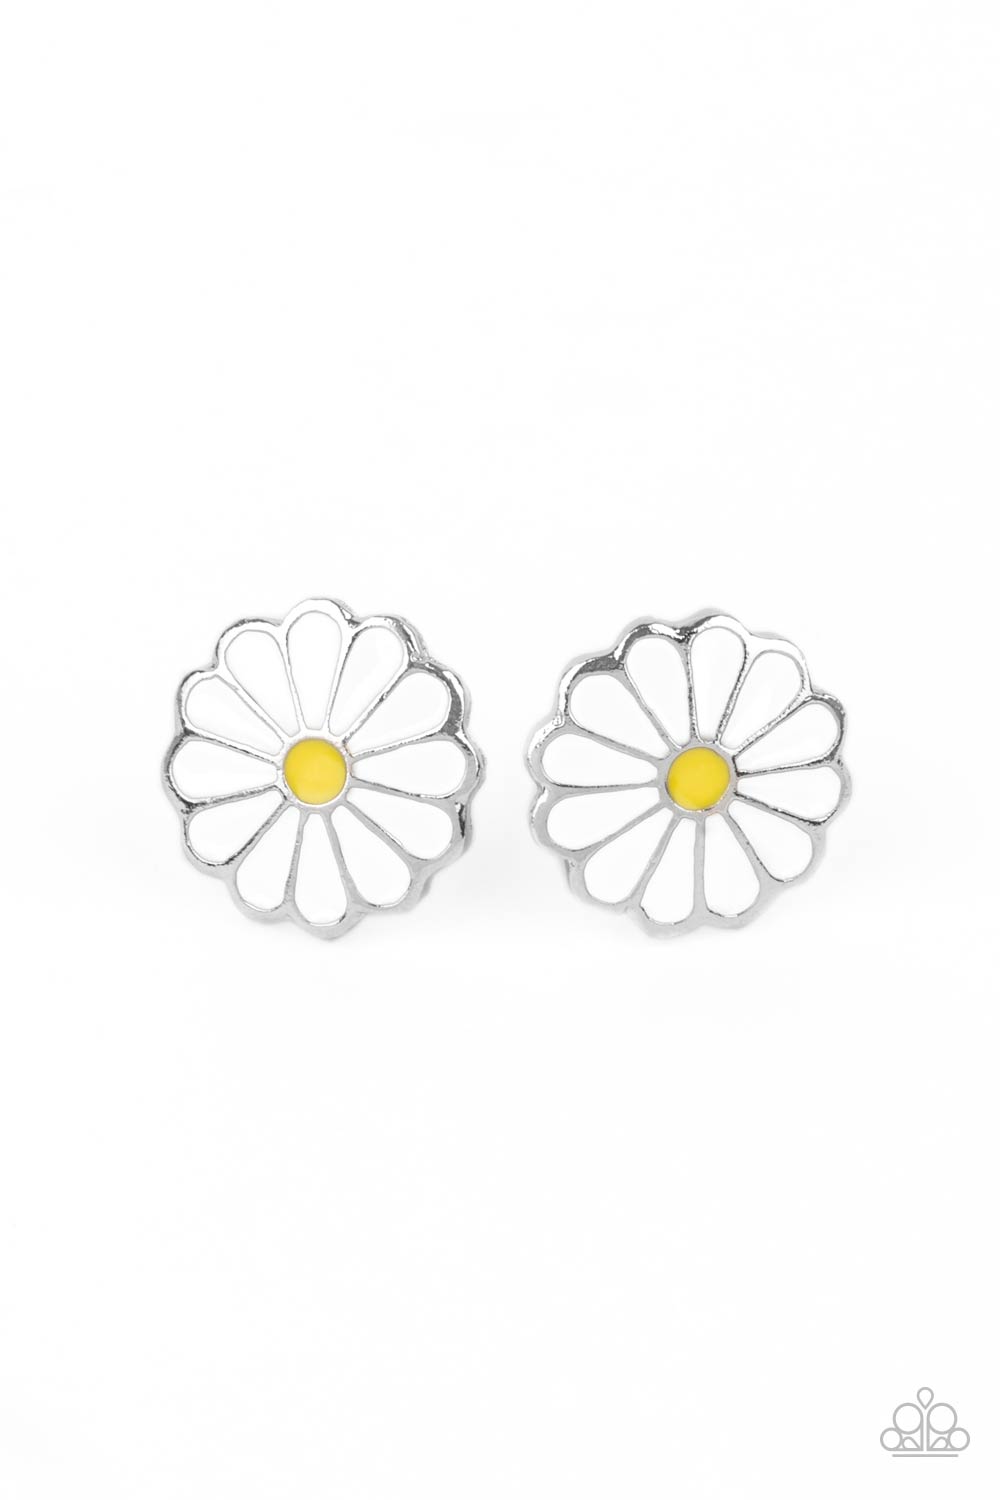 Budding Out - Paparazzi - White Daisy Post Earrings